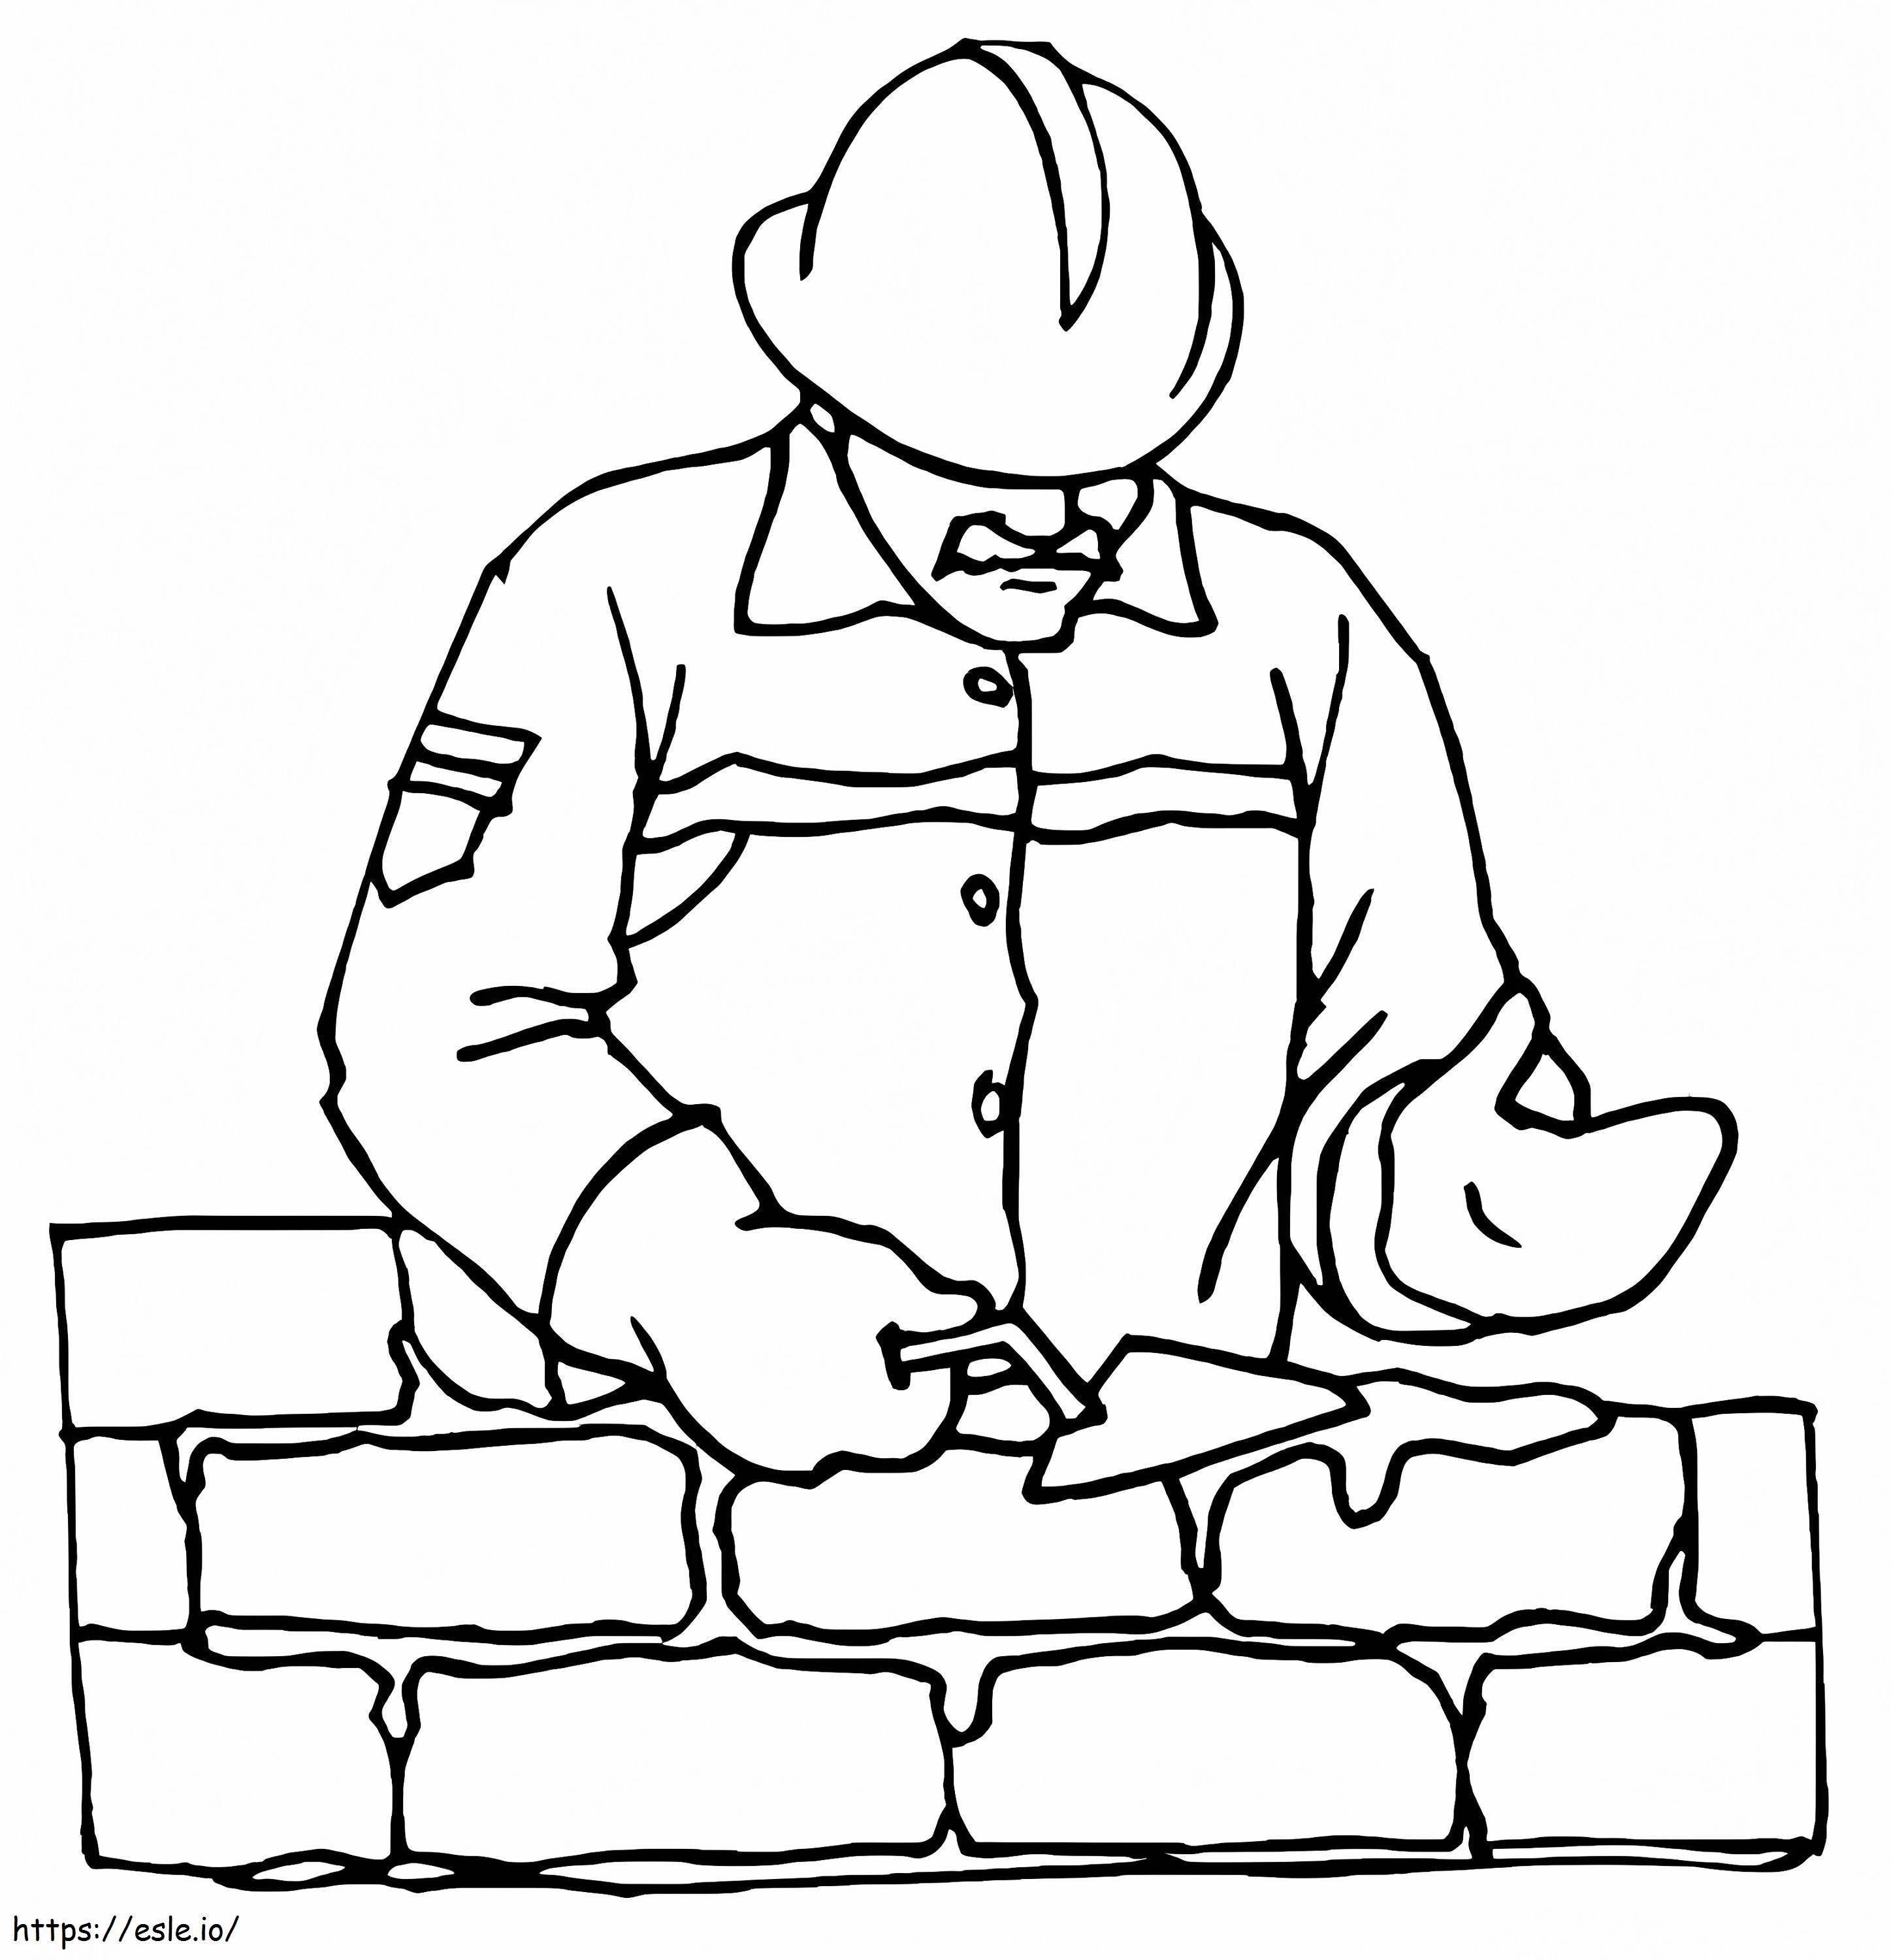 Construction Worker 9 coloring page